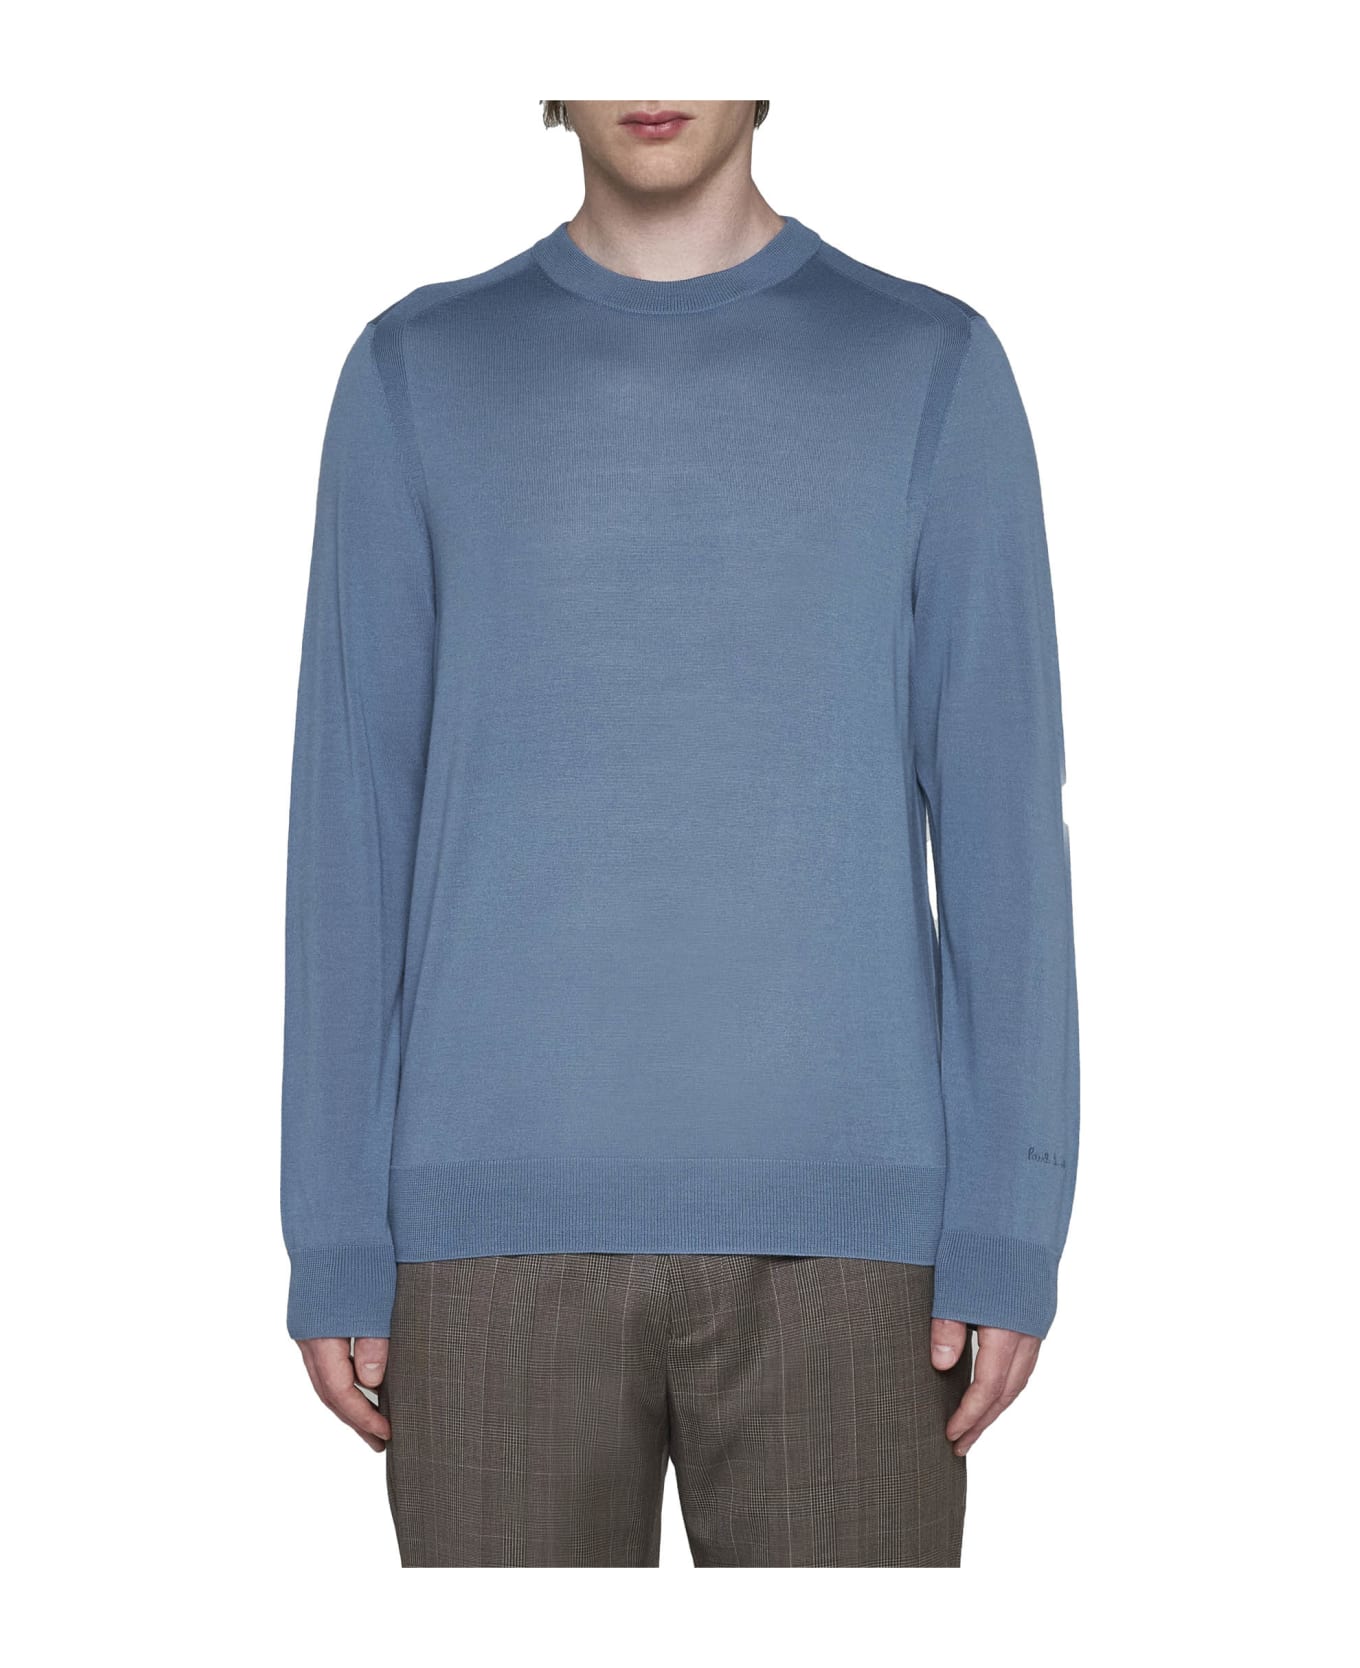 Paul Smith Sweater - Turquoise